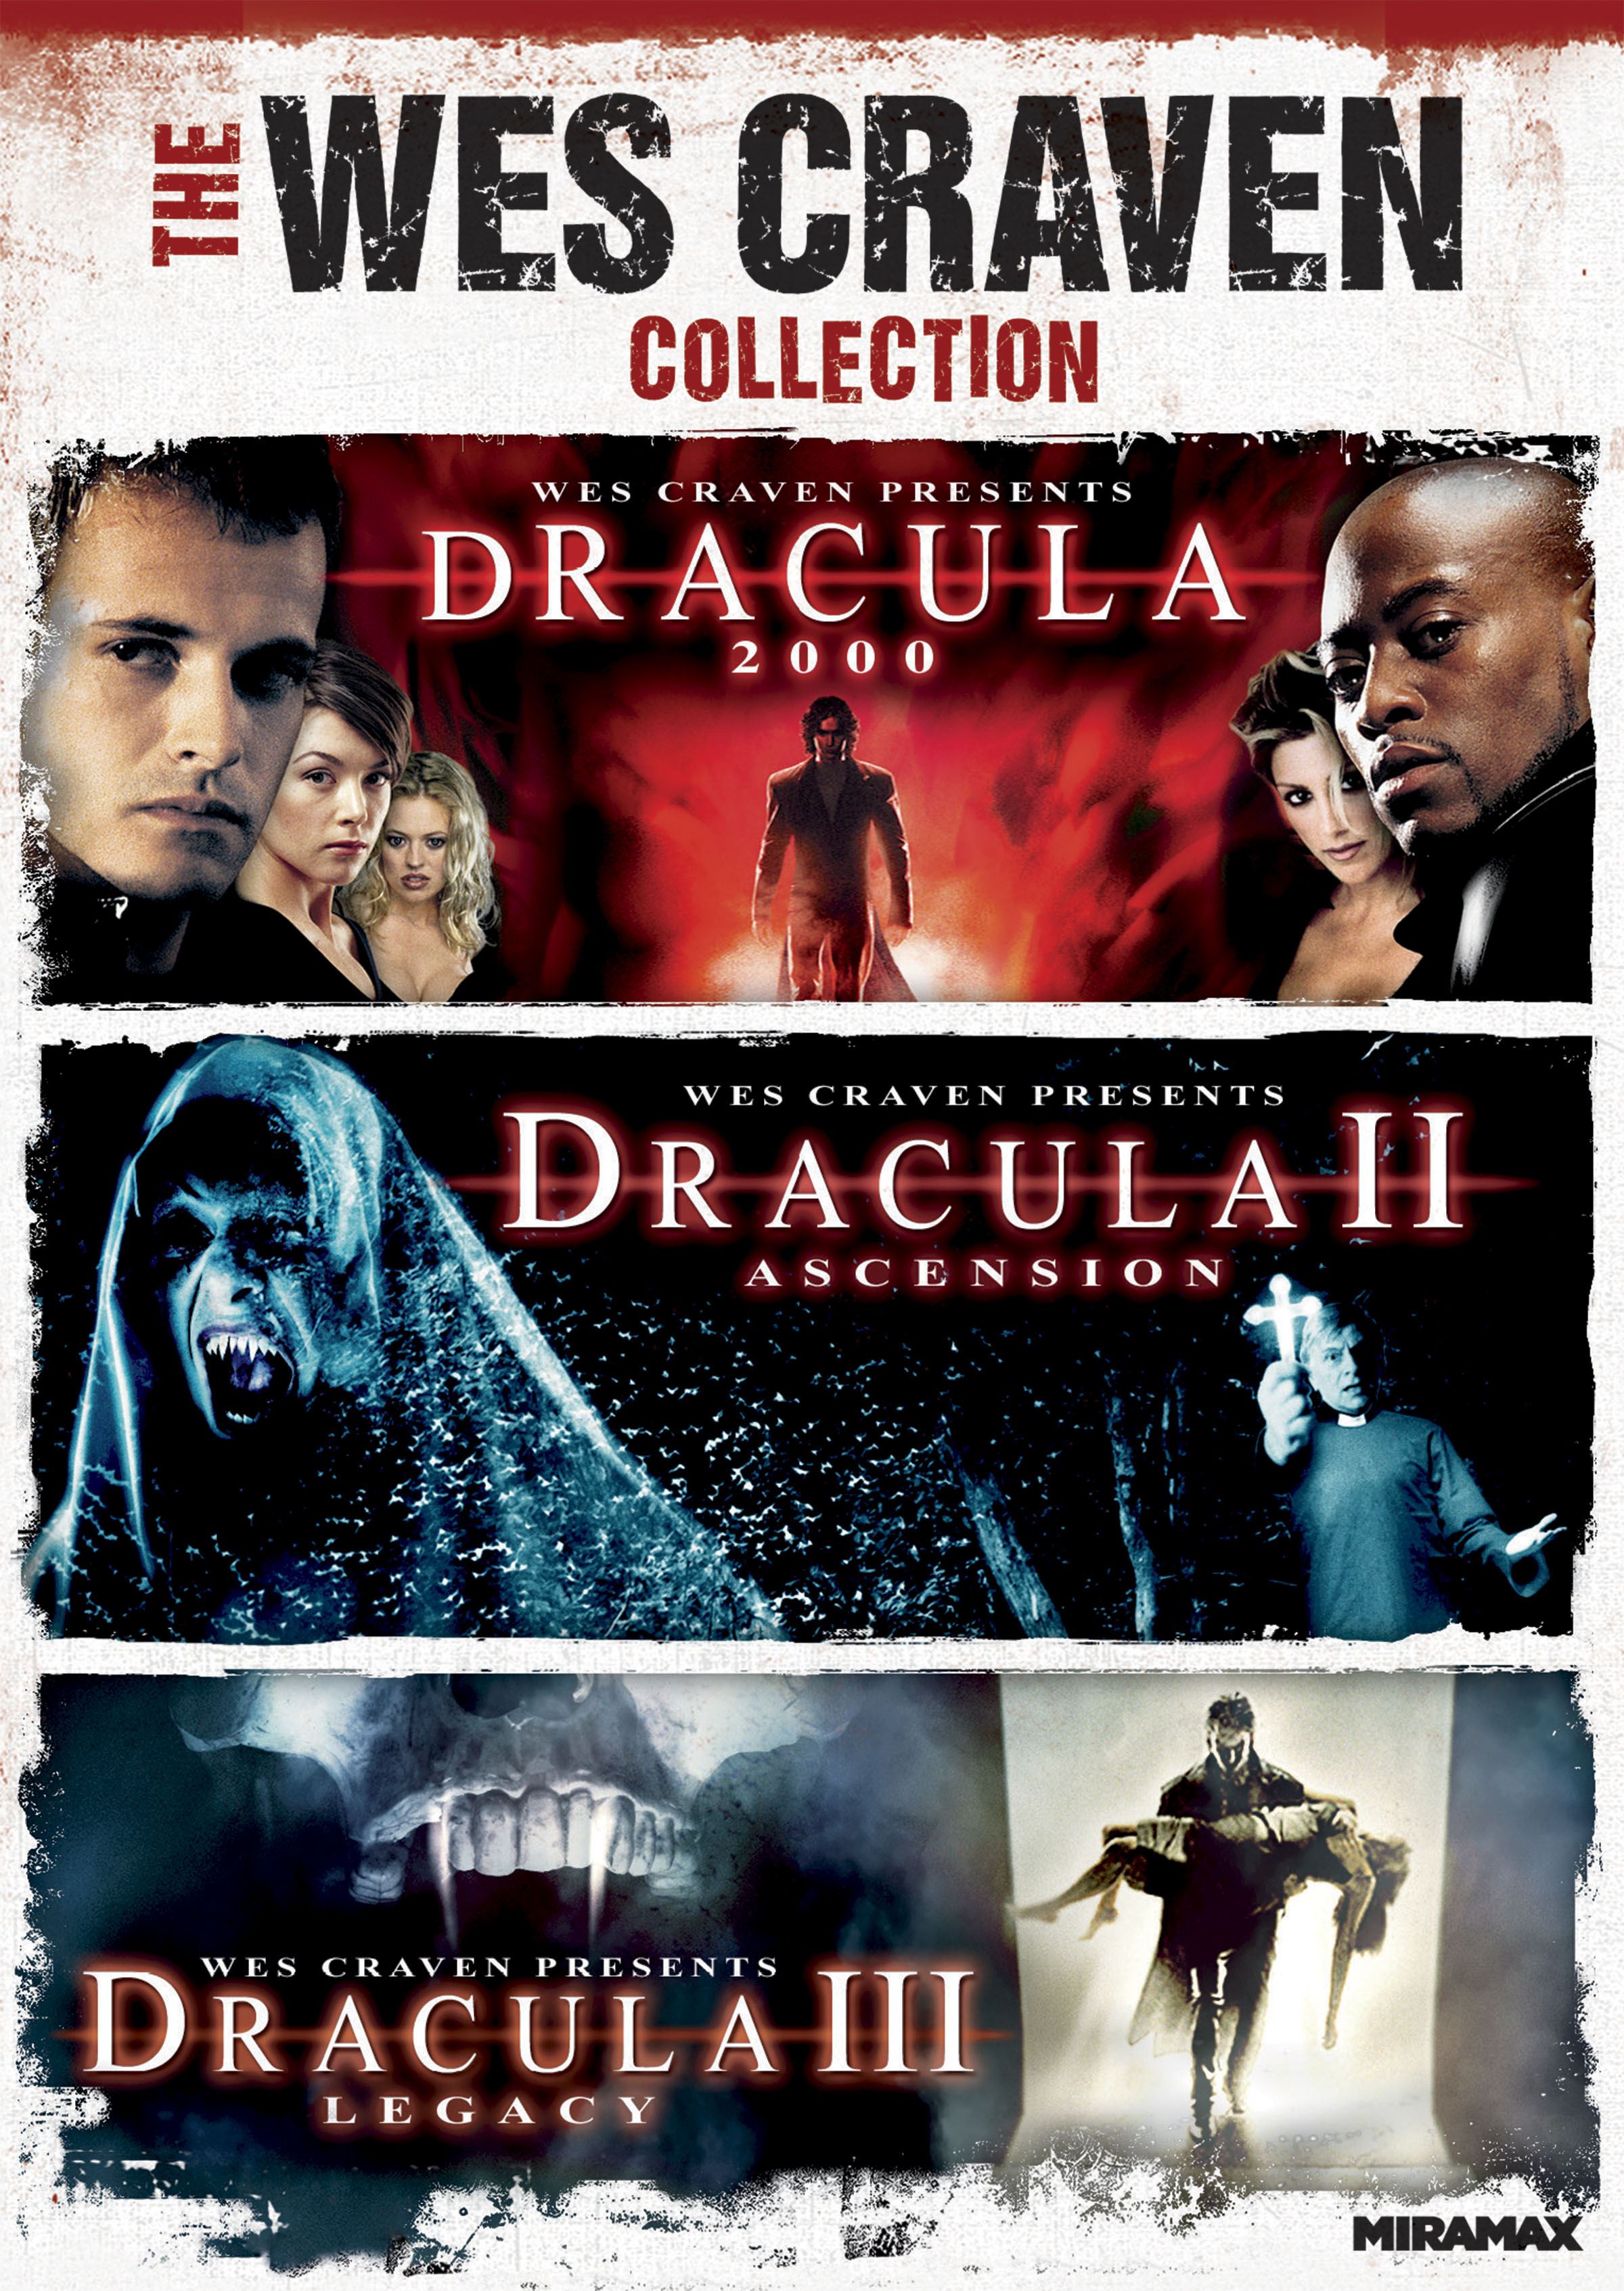 Best Buy The Wes Craven Collection Dracula 2000/Dracula II Ascension